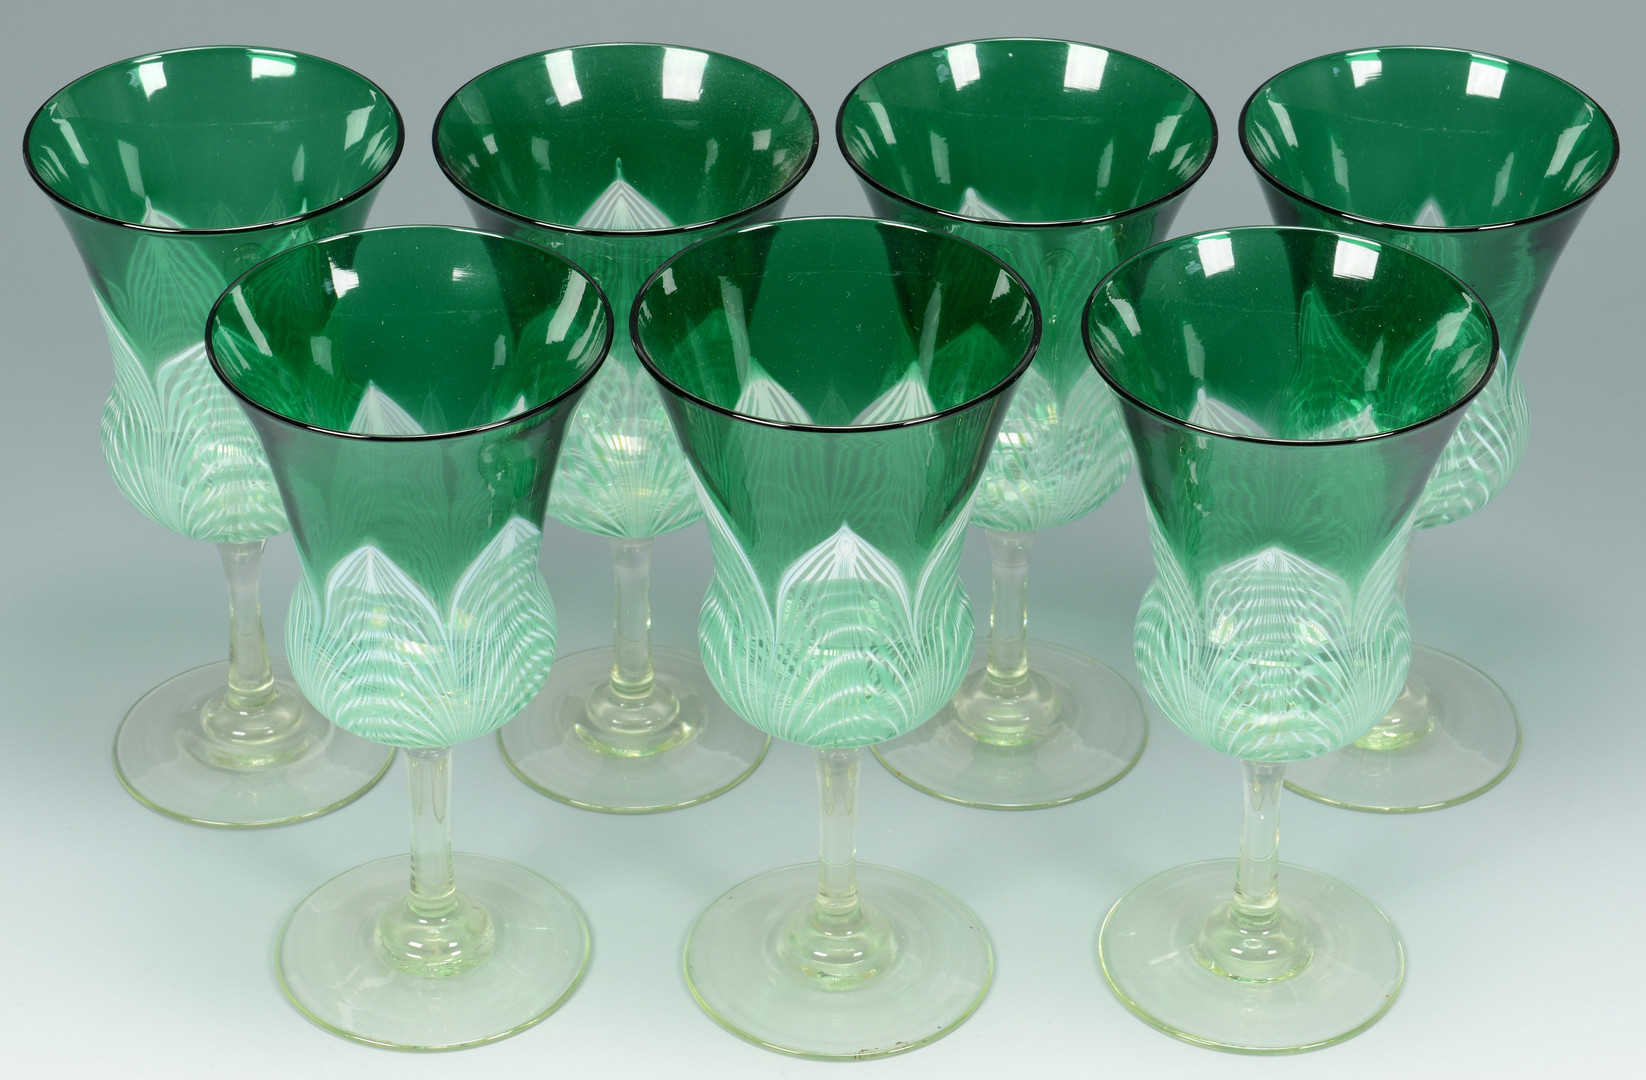 Lot 122: 7 Durand Peacock Feather Goblets